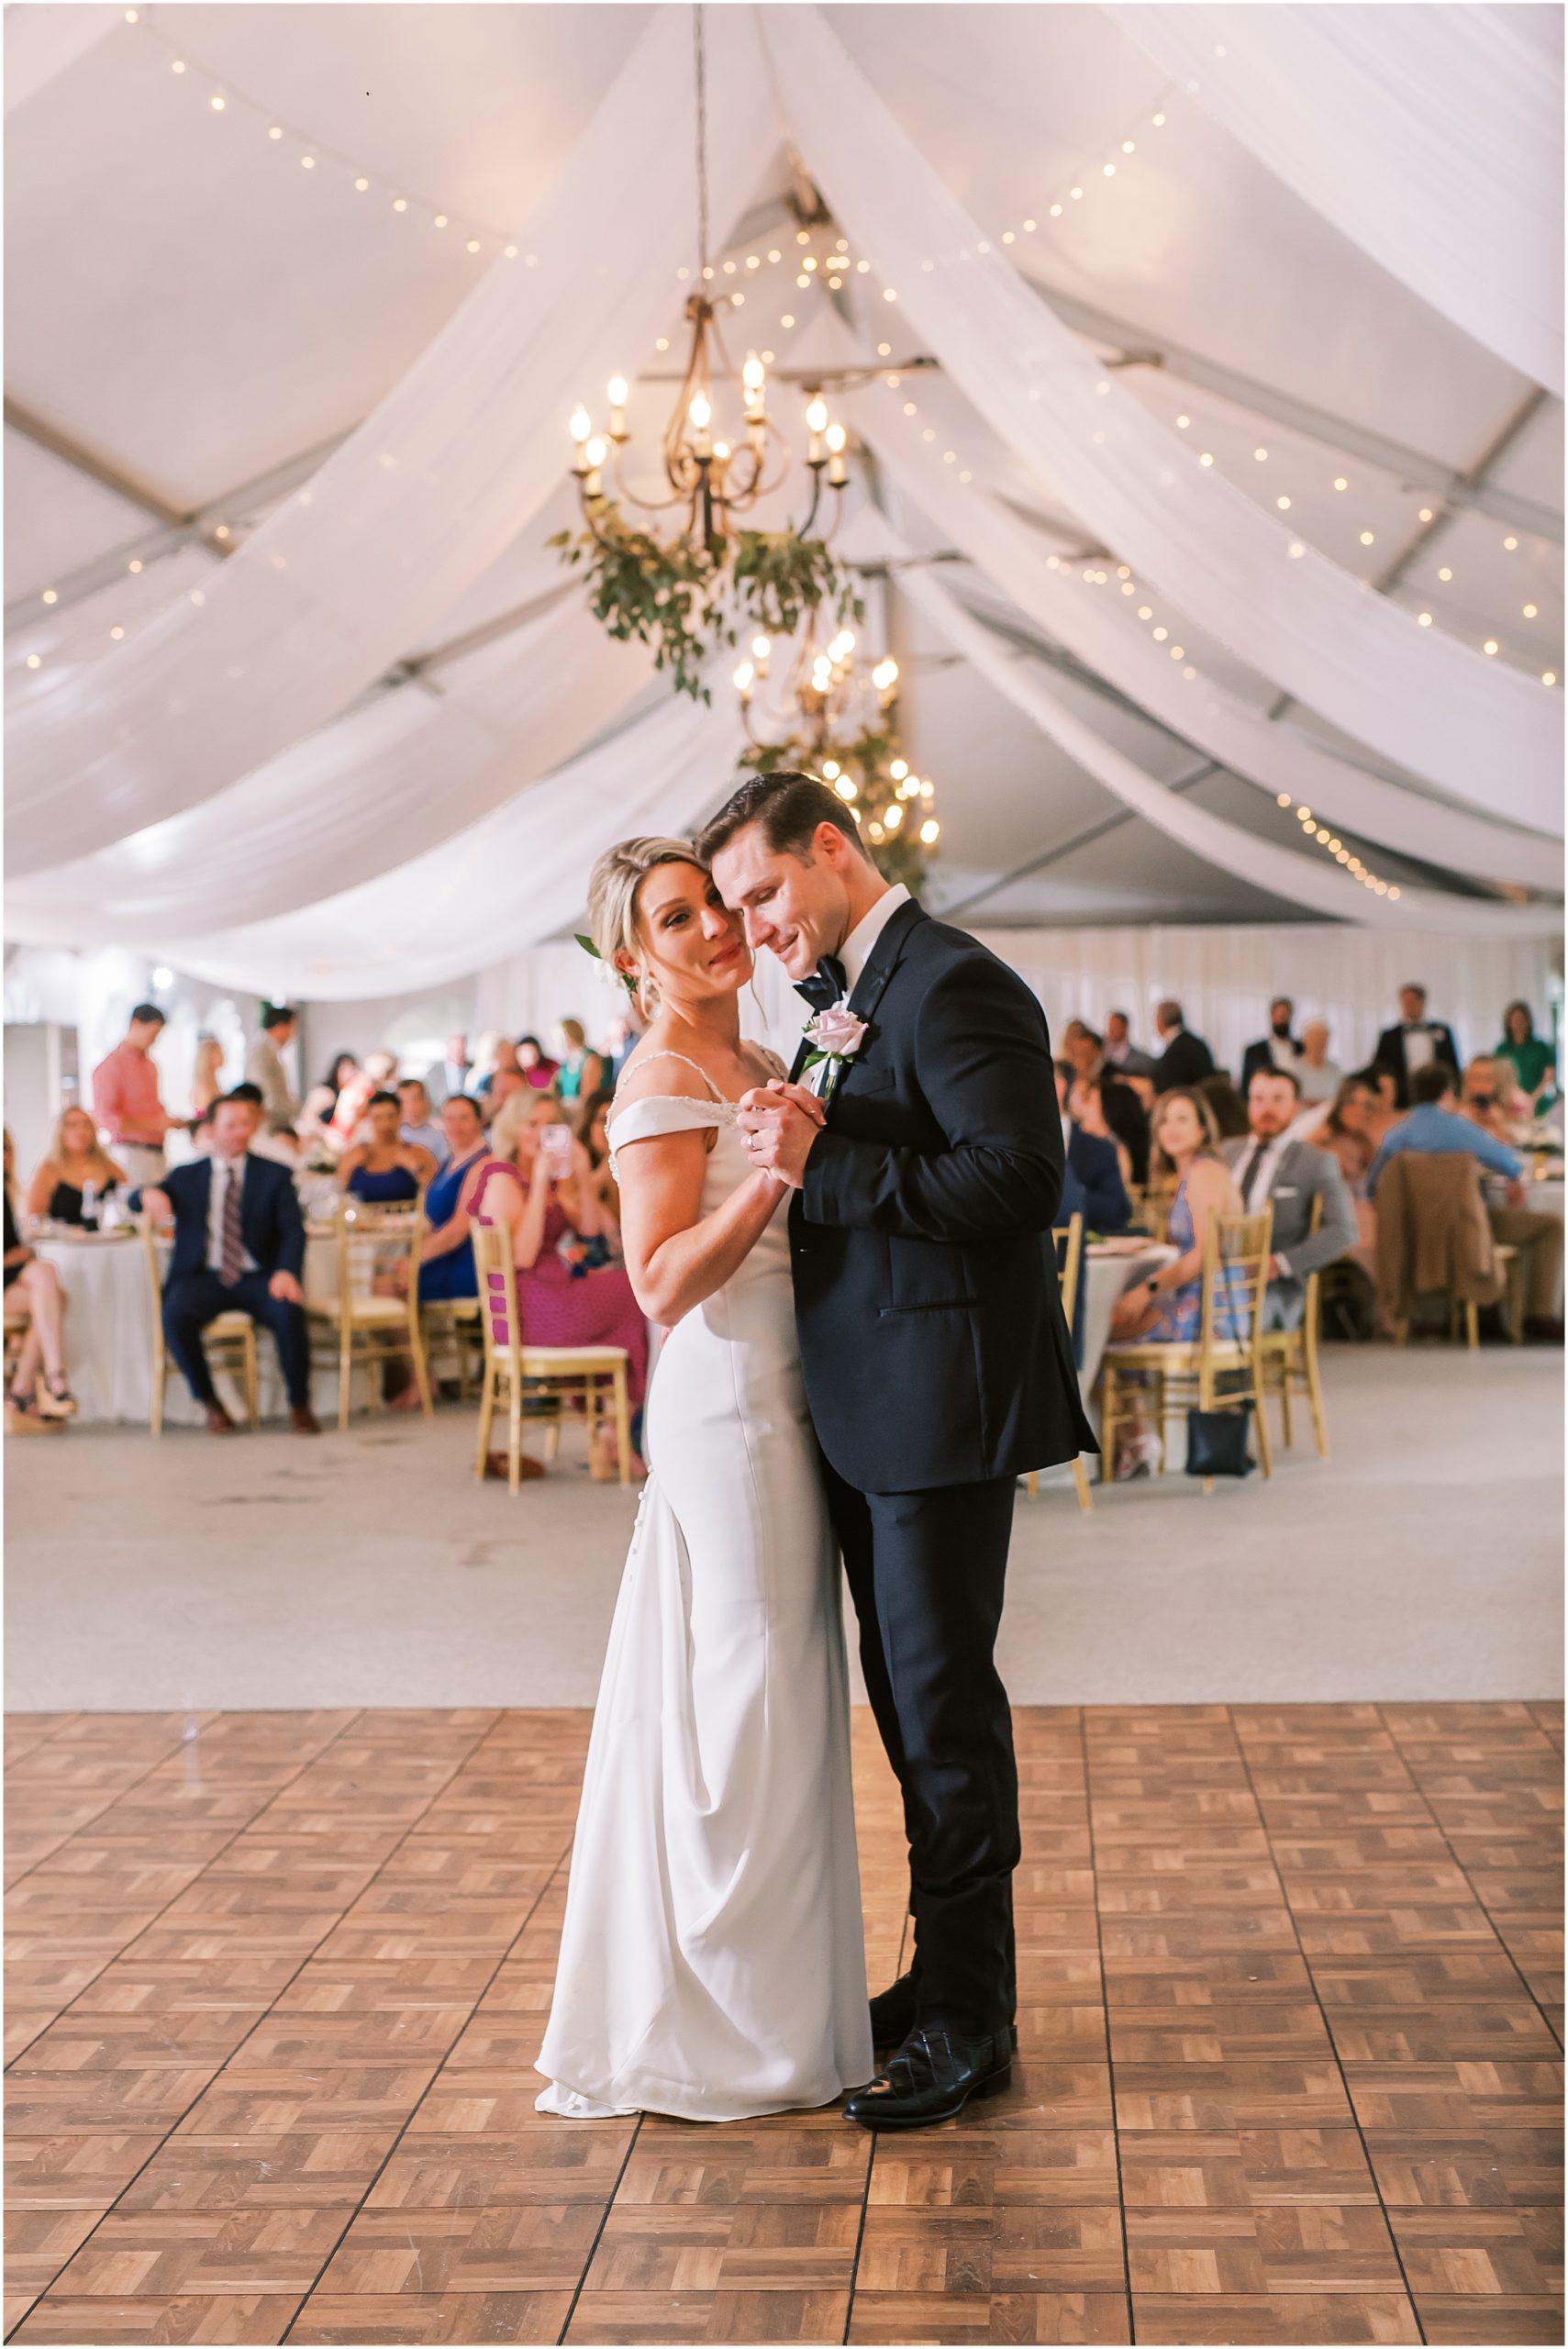 Bride and groom share first dance at their wedding